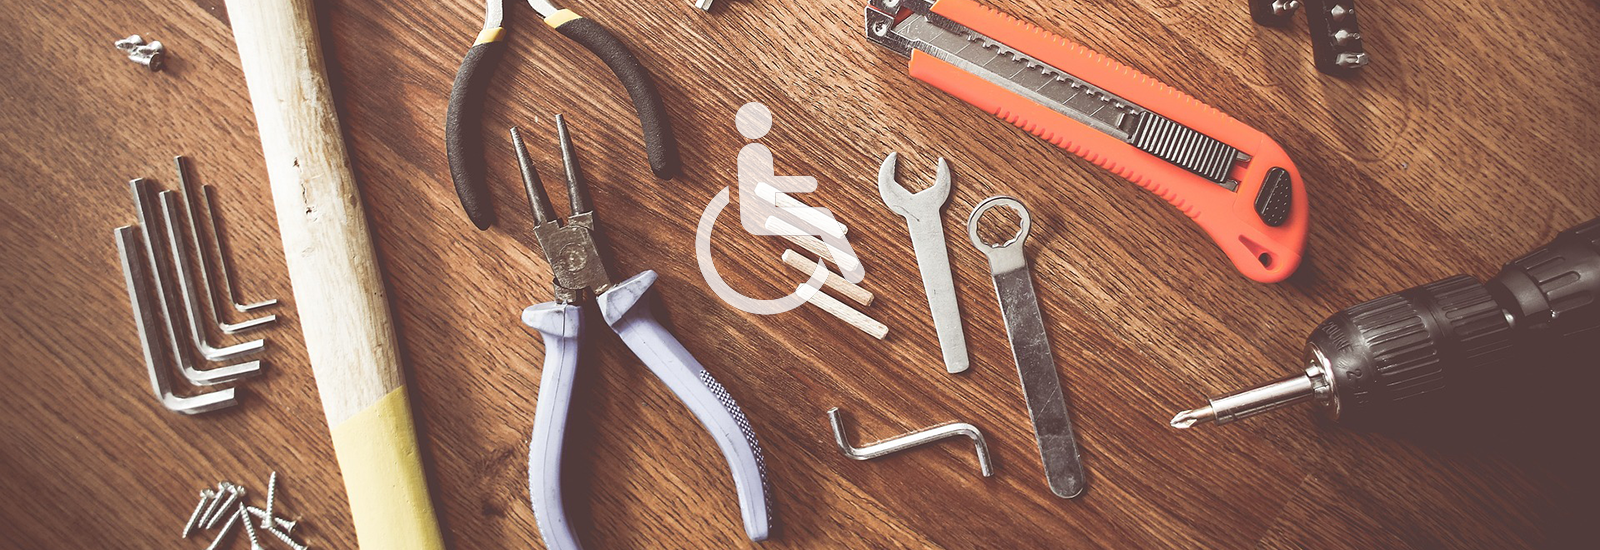 Accessibility Remediation Tools